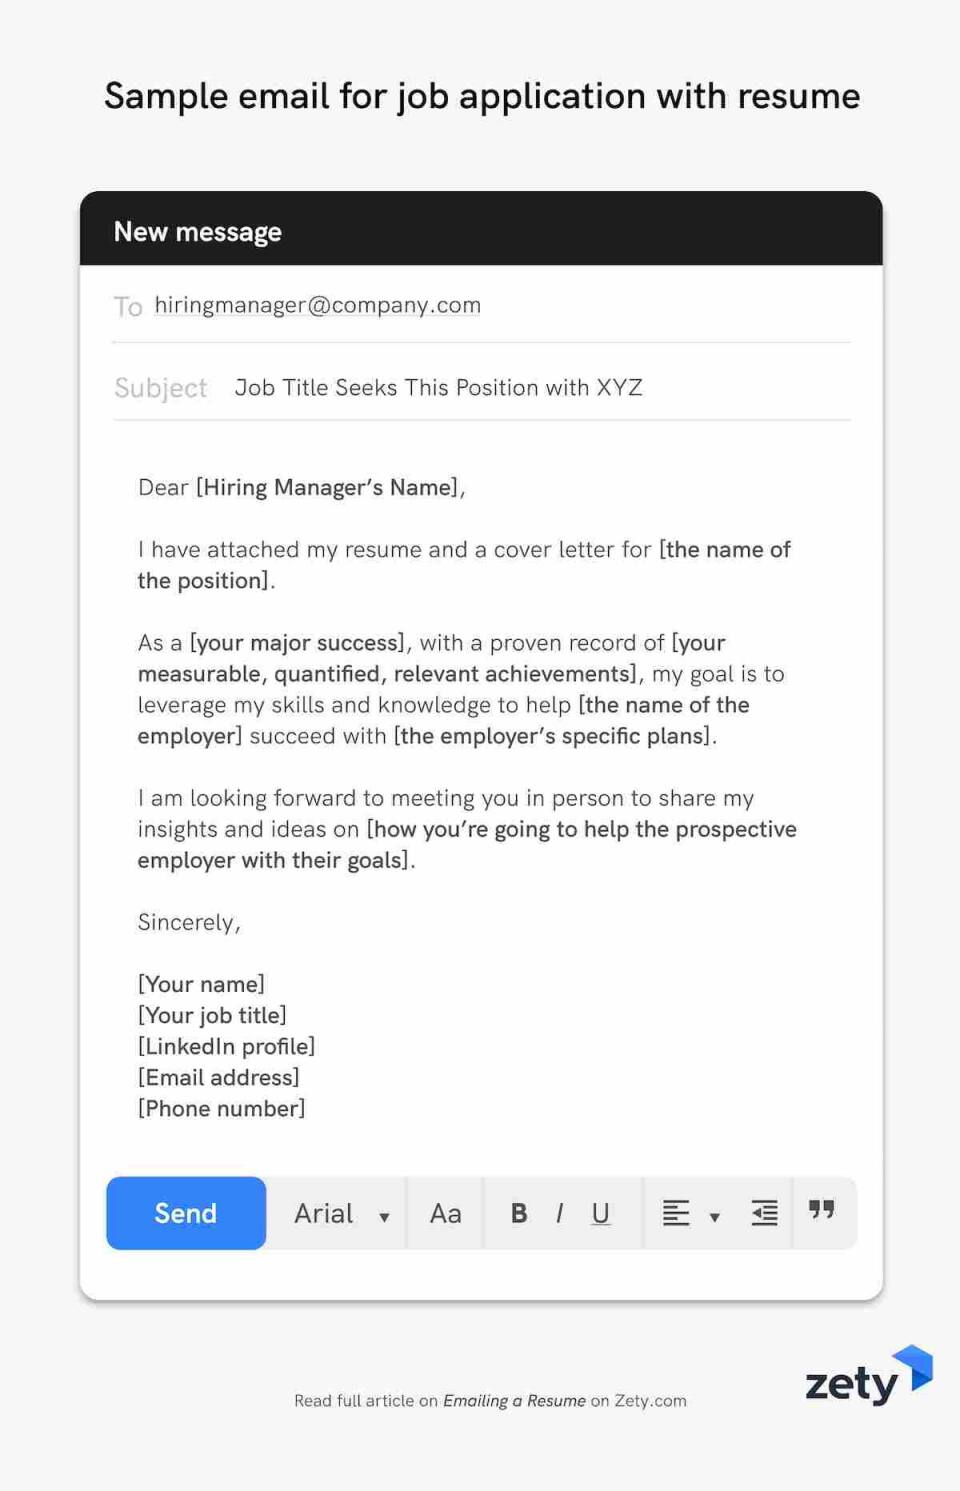 Emailing A Cover Letter from cdn-images.zety.com